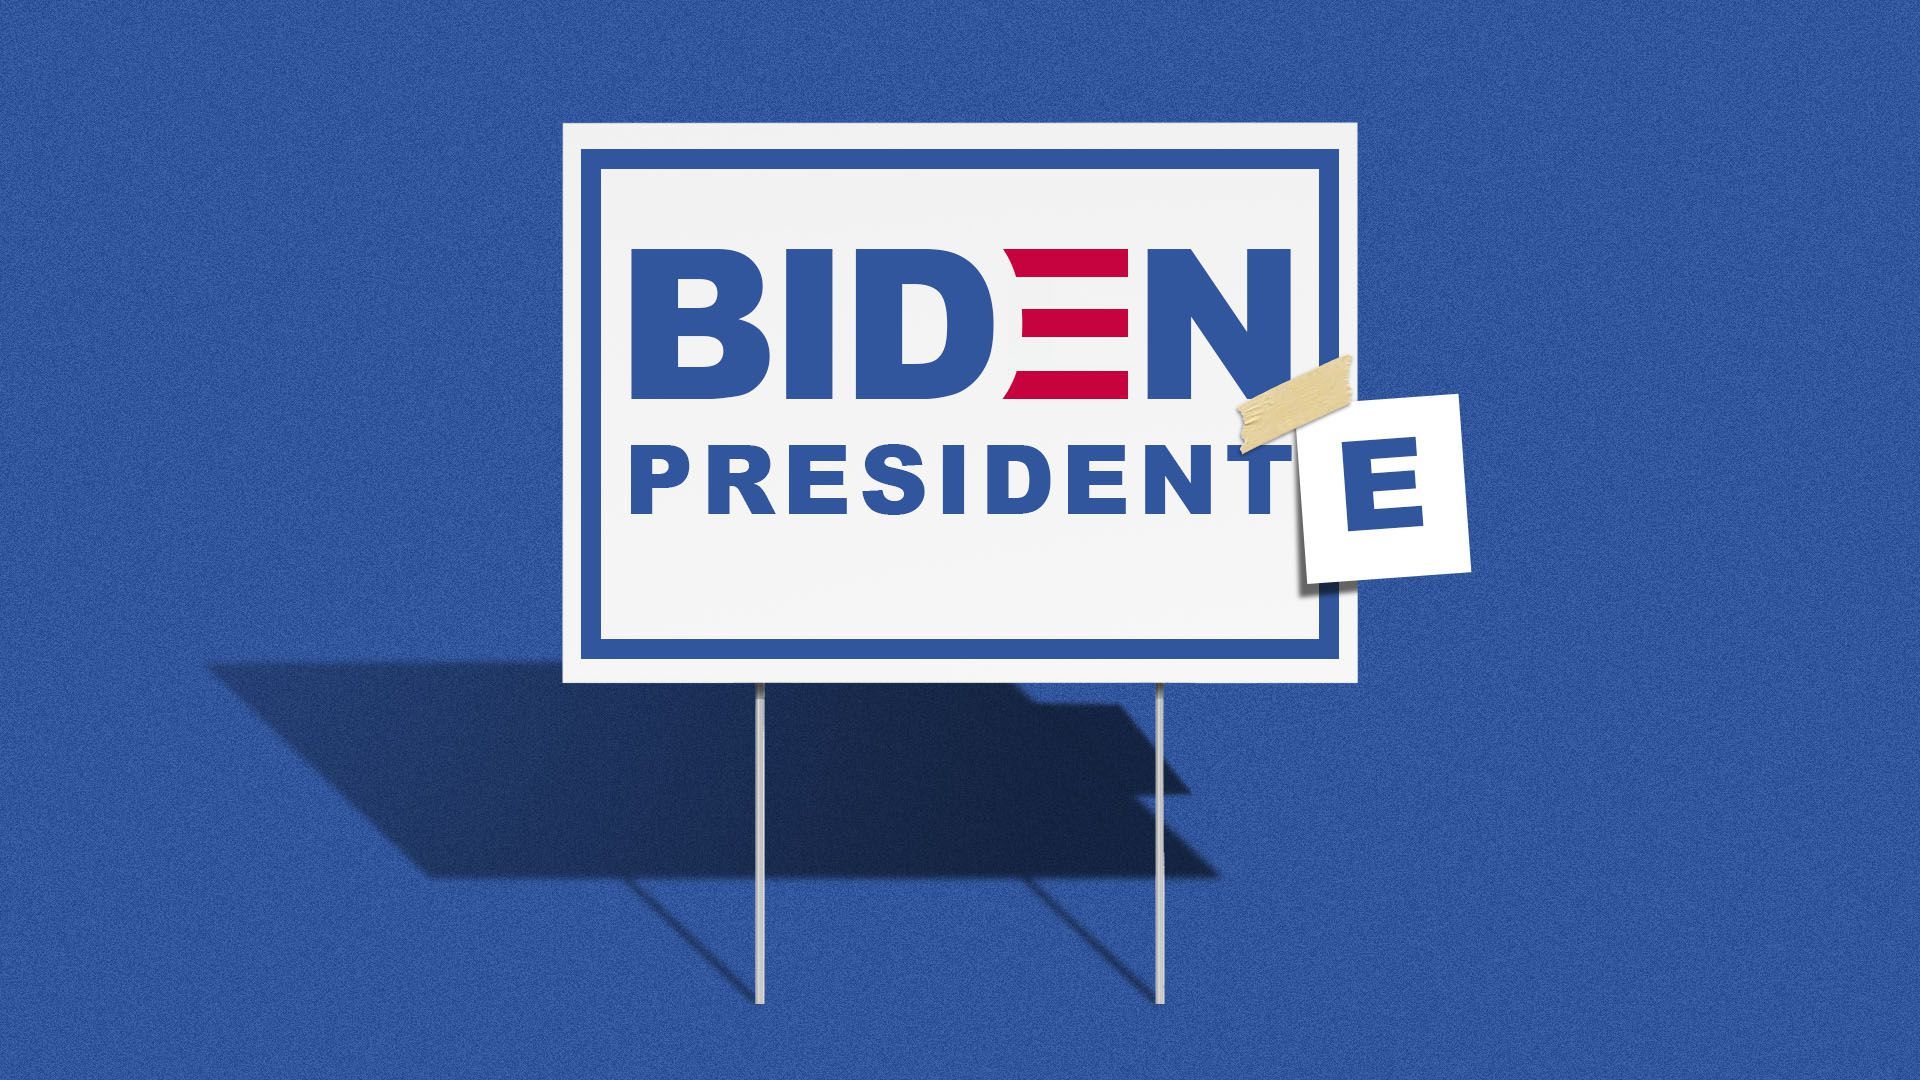 Illustration of a Biden for President lawn sign with an e taped on to the word president